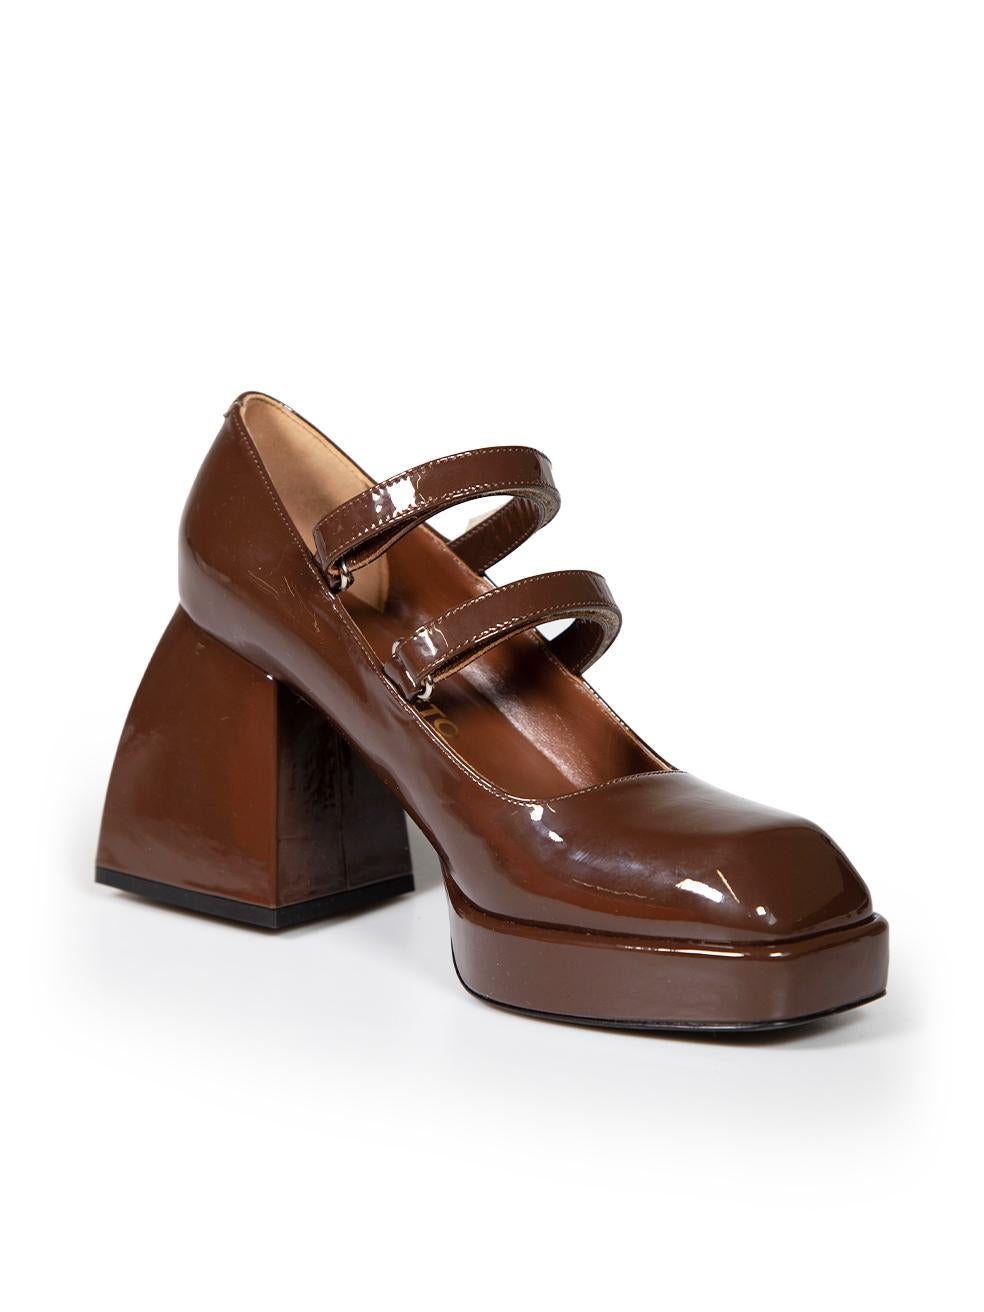 CONDITION is Very good. Minimal wear to heels is evident. Minimal wear to soles on this used Nodaleto designer resale item. These shoes come with original box and dust bag.
 
 
 
 Details
 
 
 Model: Bulla Babies
 
 Brown
 
 Patent leather
 
 Heels
